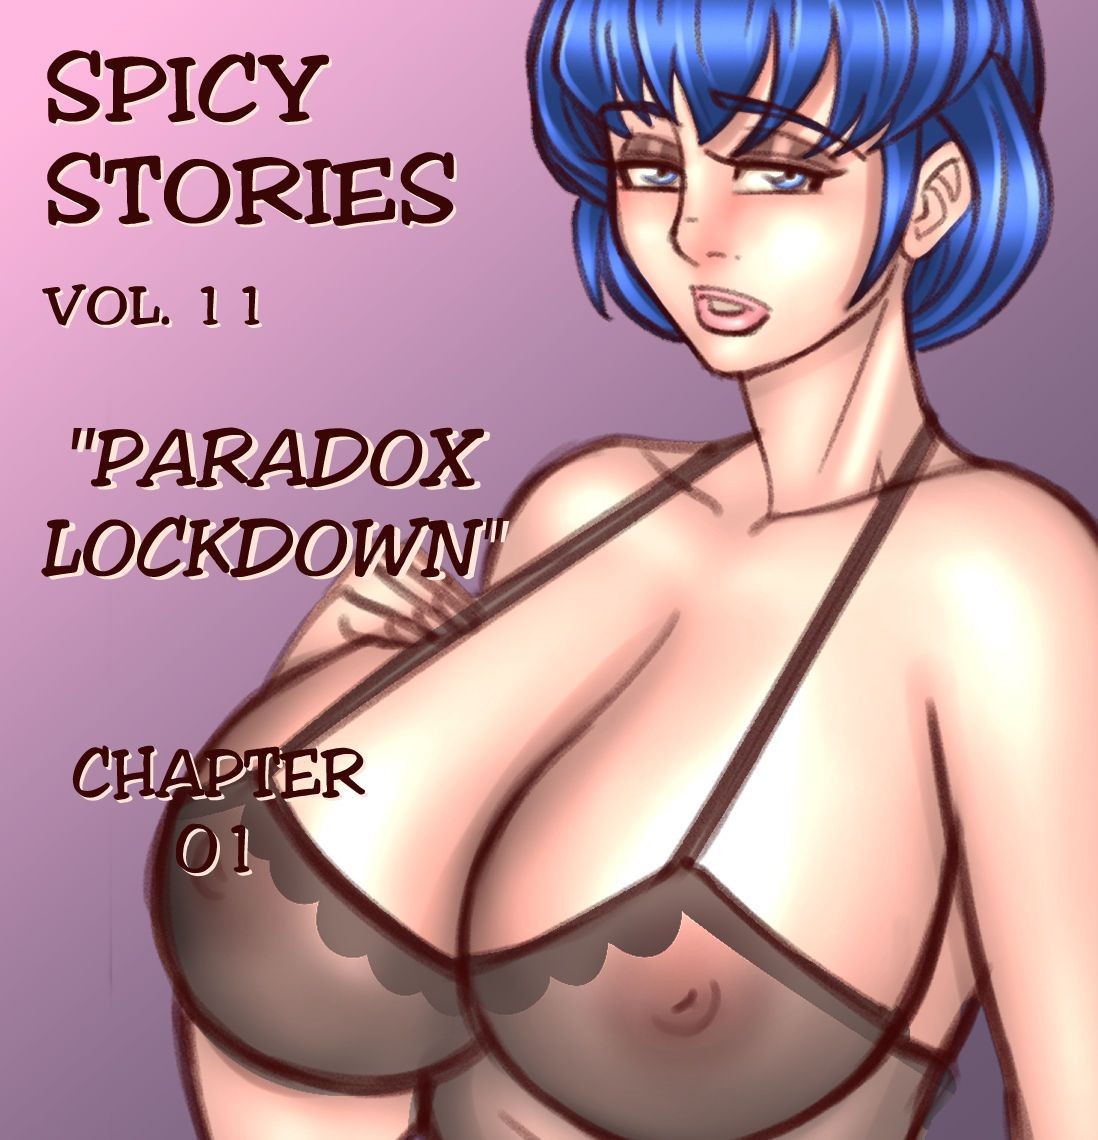 Tiny Girl NGT Spicy Stories 11 - Paradox Lockdown (ONGOING) NGT Spicy Stories 11 - Paradox Lockdown (ONGOING) Pussy Licking